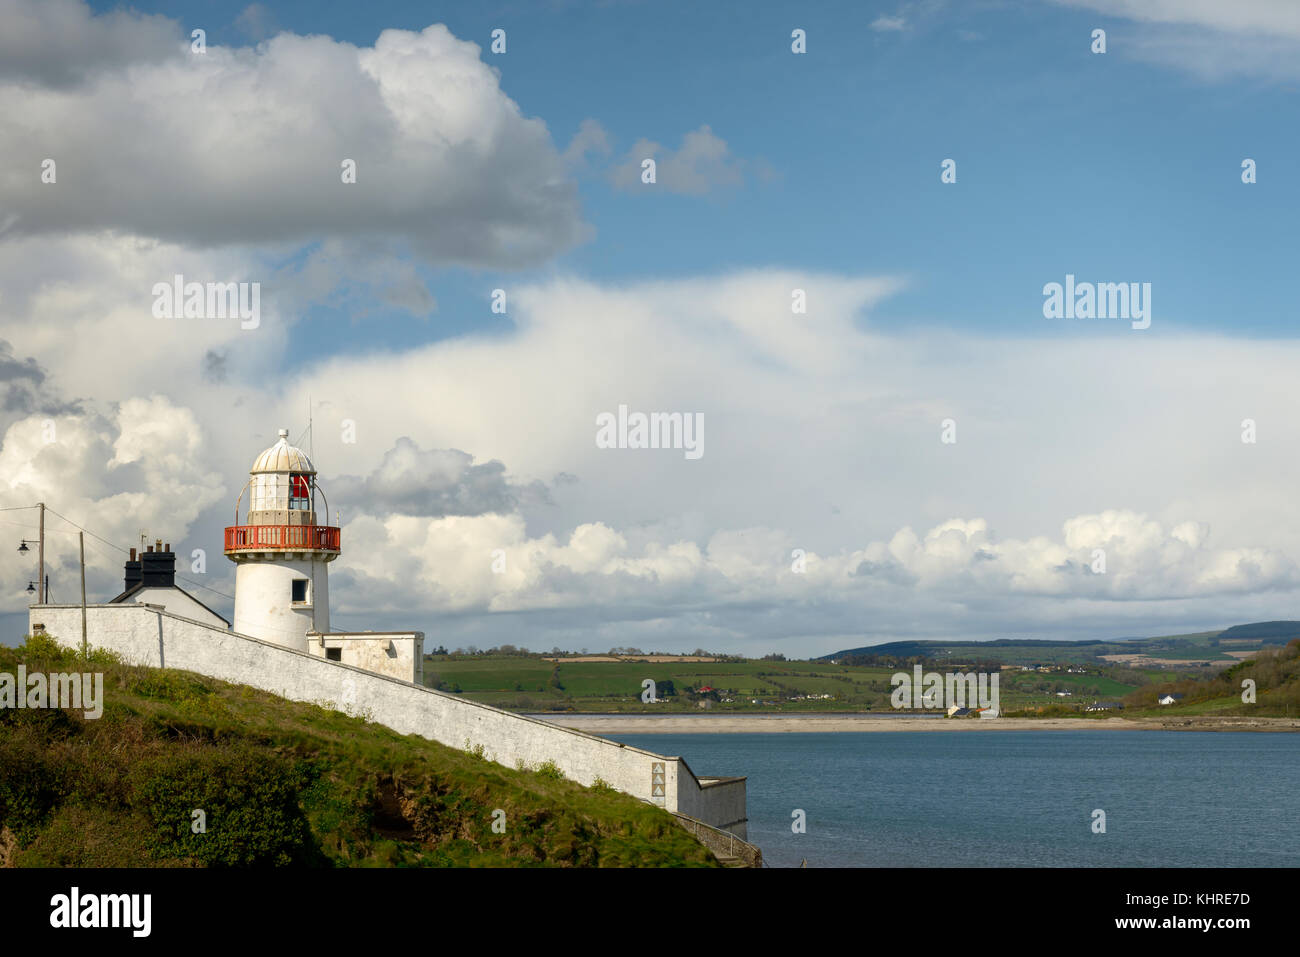 Lighthouses in Ireland and the Youghal lighthouse at the River Blackwater mouth on the Youghal bay on summer day in Youghal, County Cork, Ireland Stock Photo